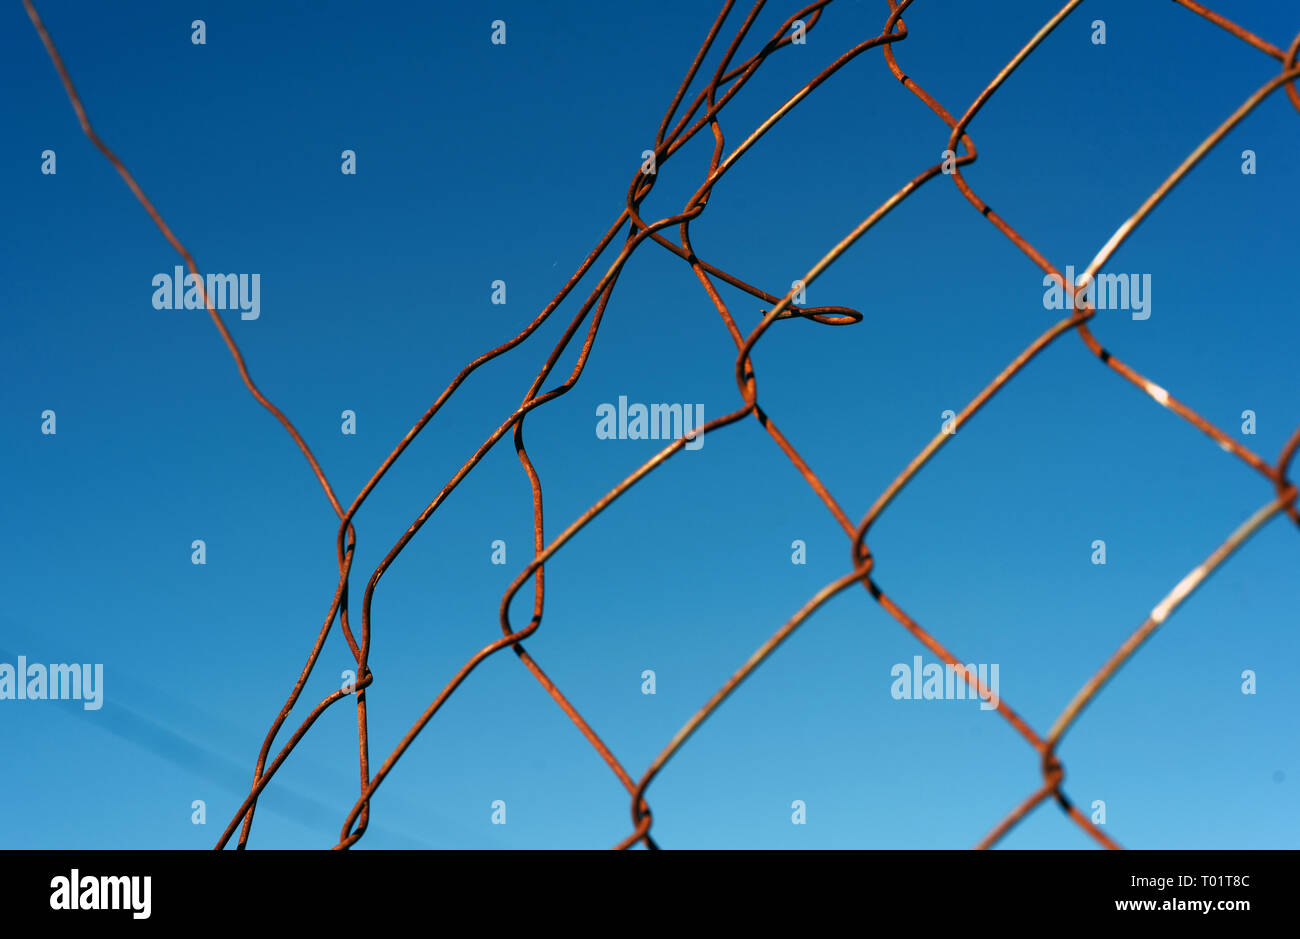 Broken and damaged chainlink mesh wire fence with a blue sky and a whole in the fencing Stock Photo